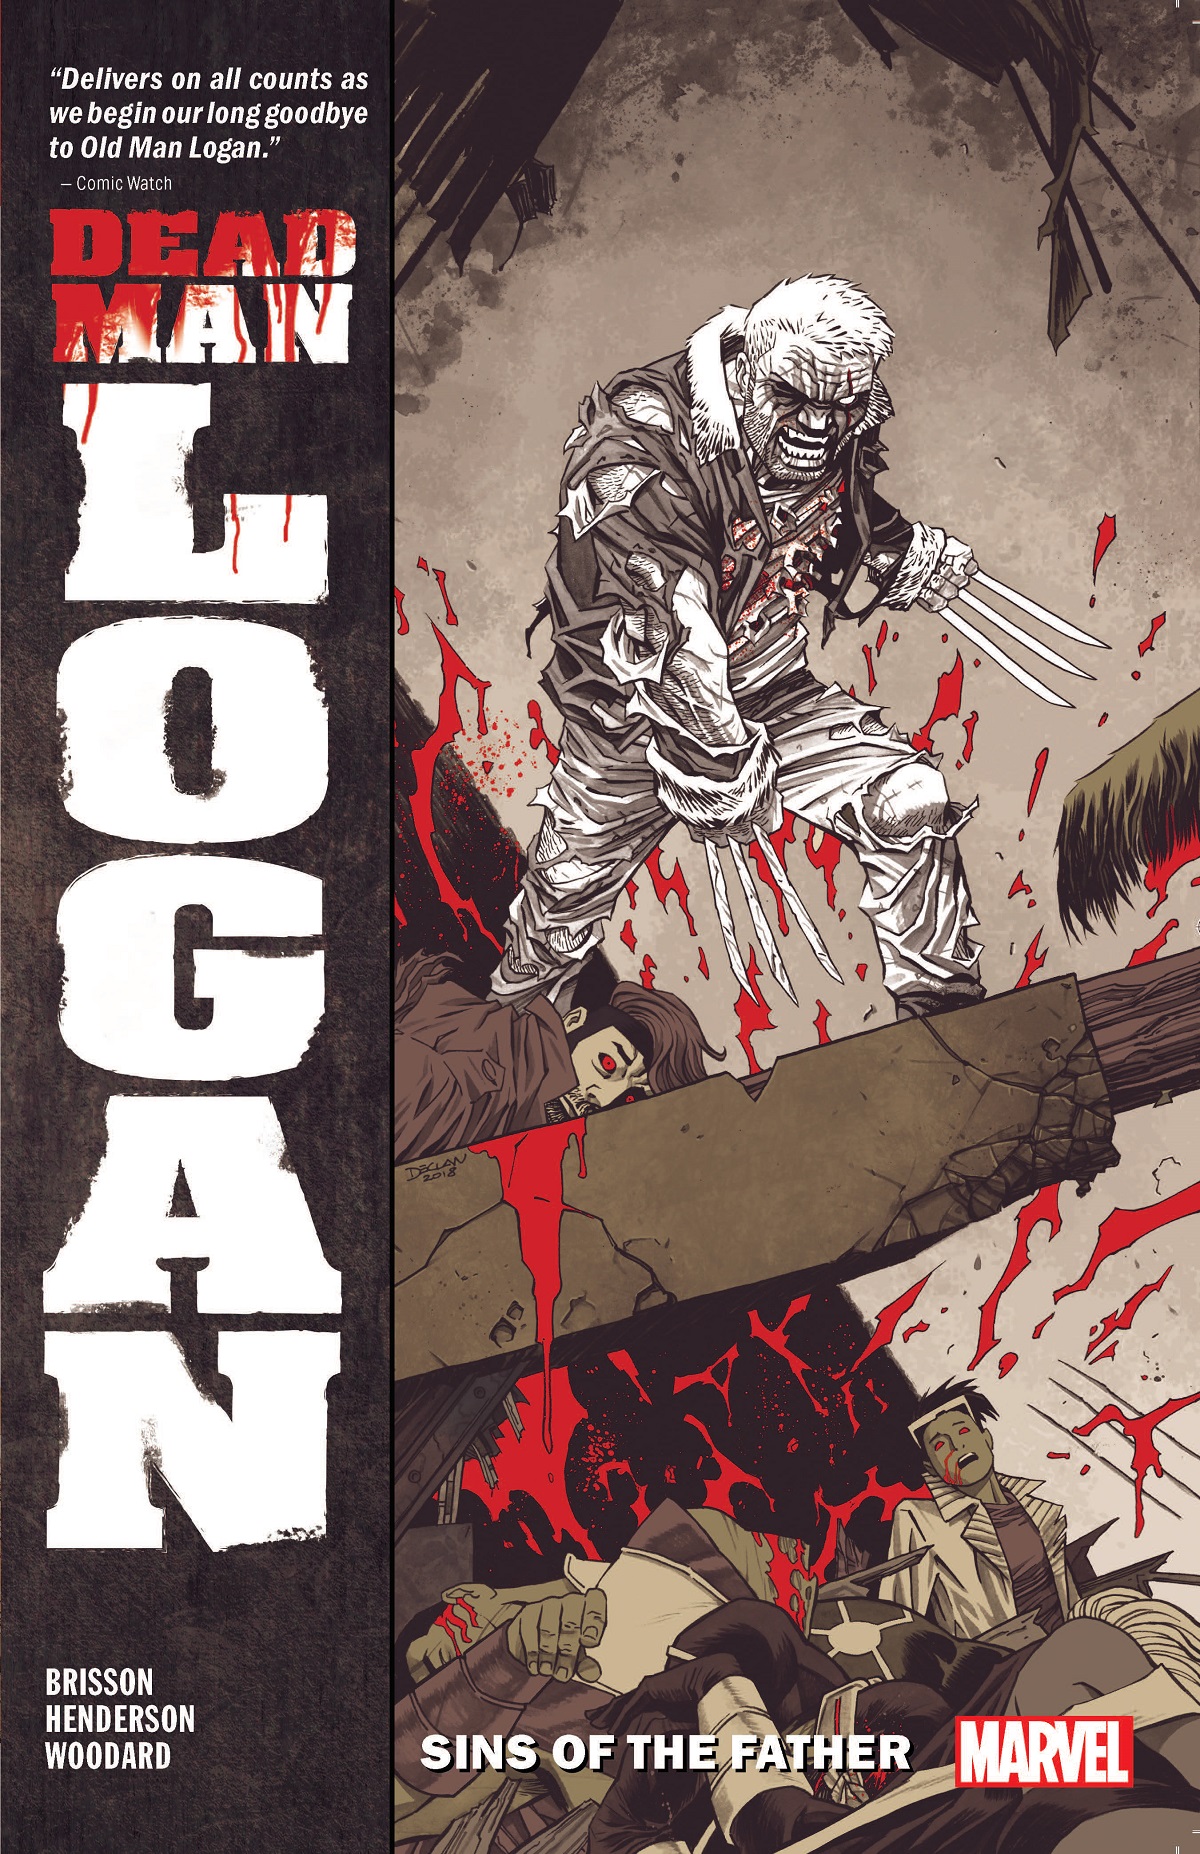 Dead Man Logan Vol. 1: Sins Of The Father (Trade Paperback)